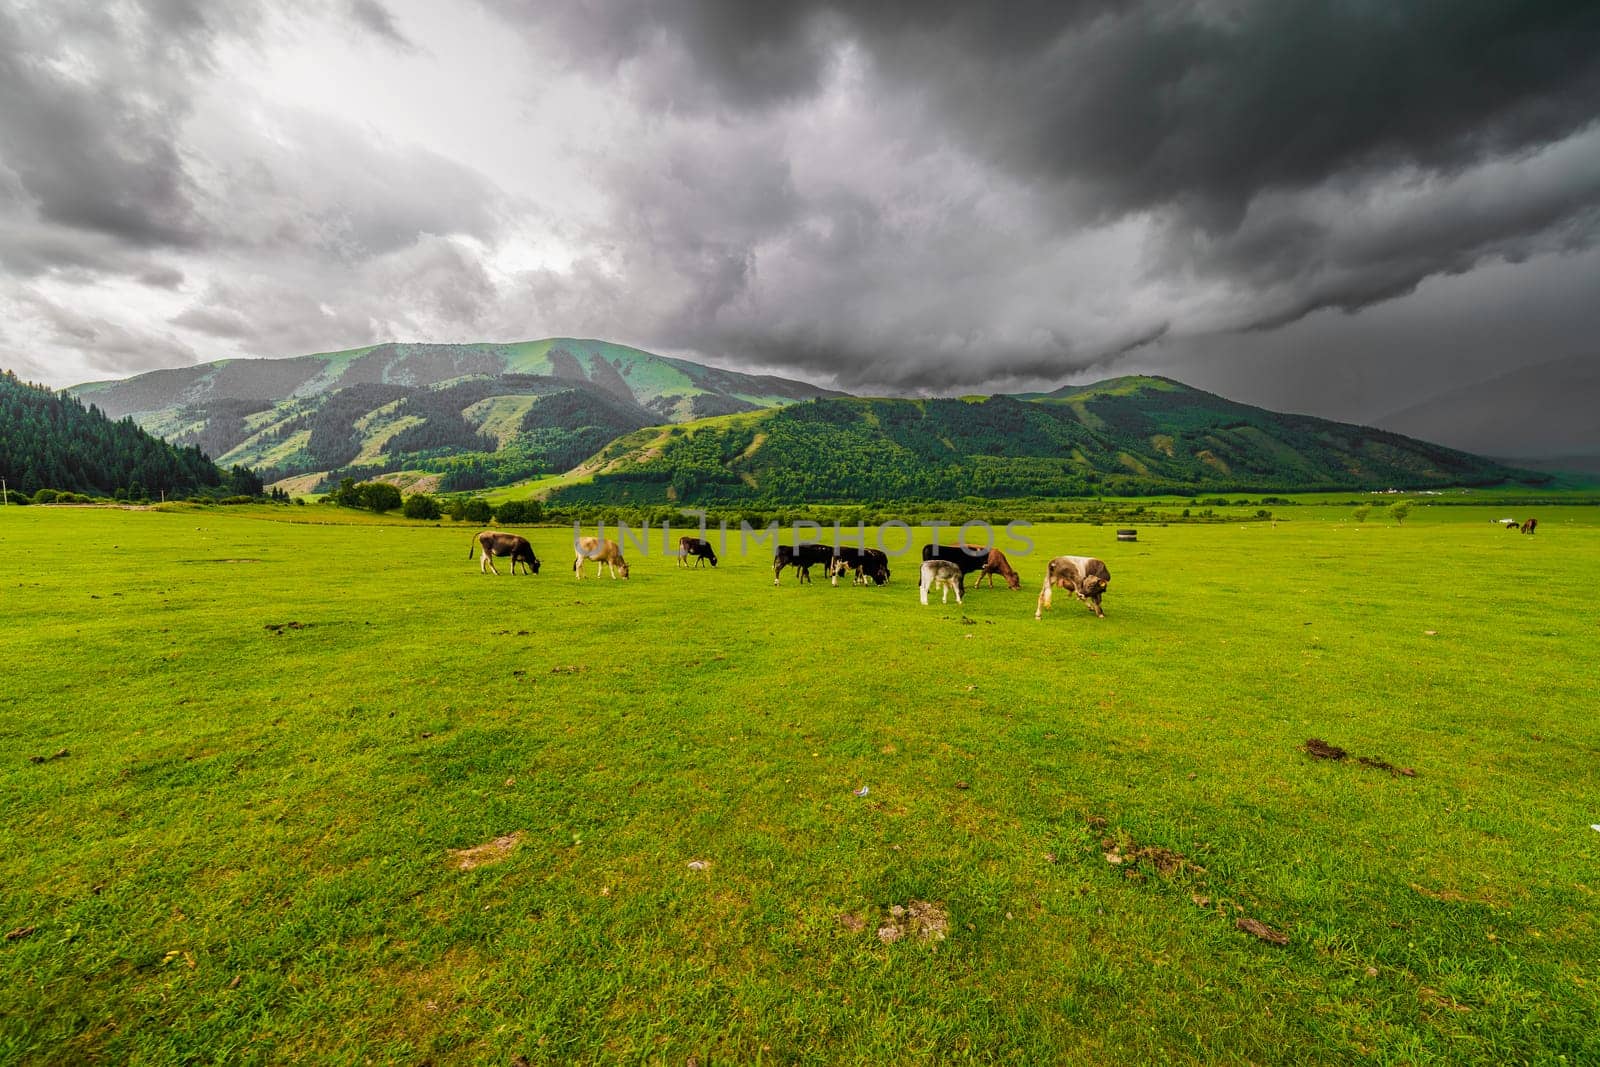 A herd of cows peacefully grazing in a green grassland with mountains in the background under a cloudy sky, creating a beautiful natural landscape